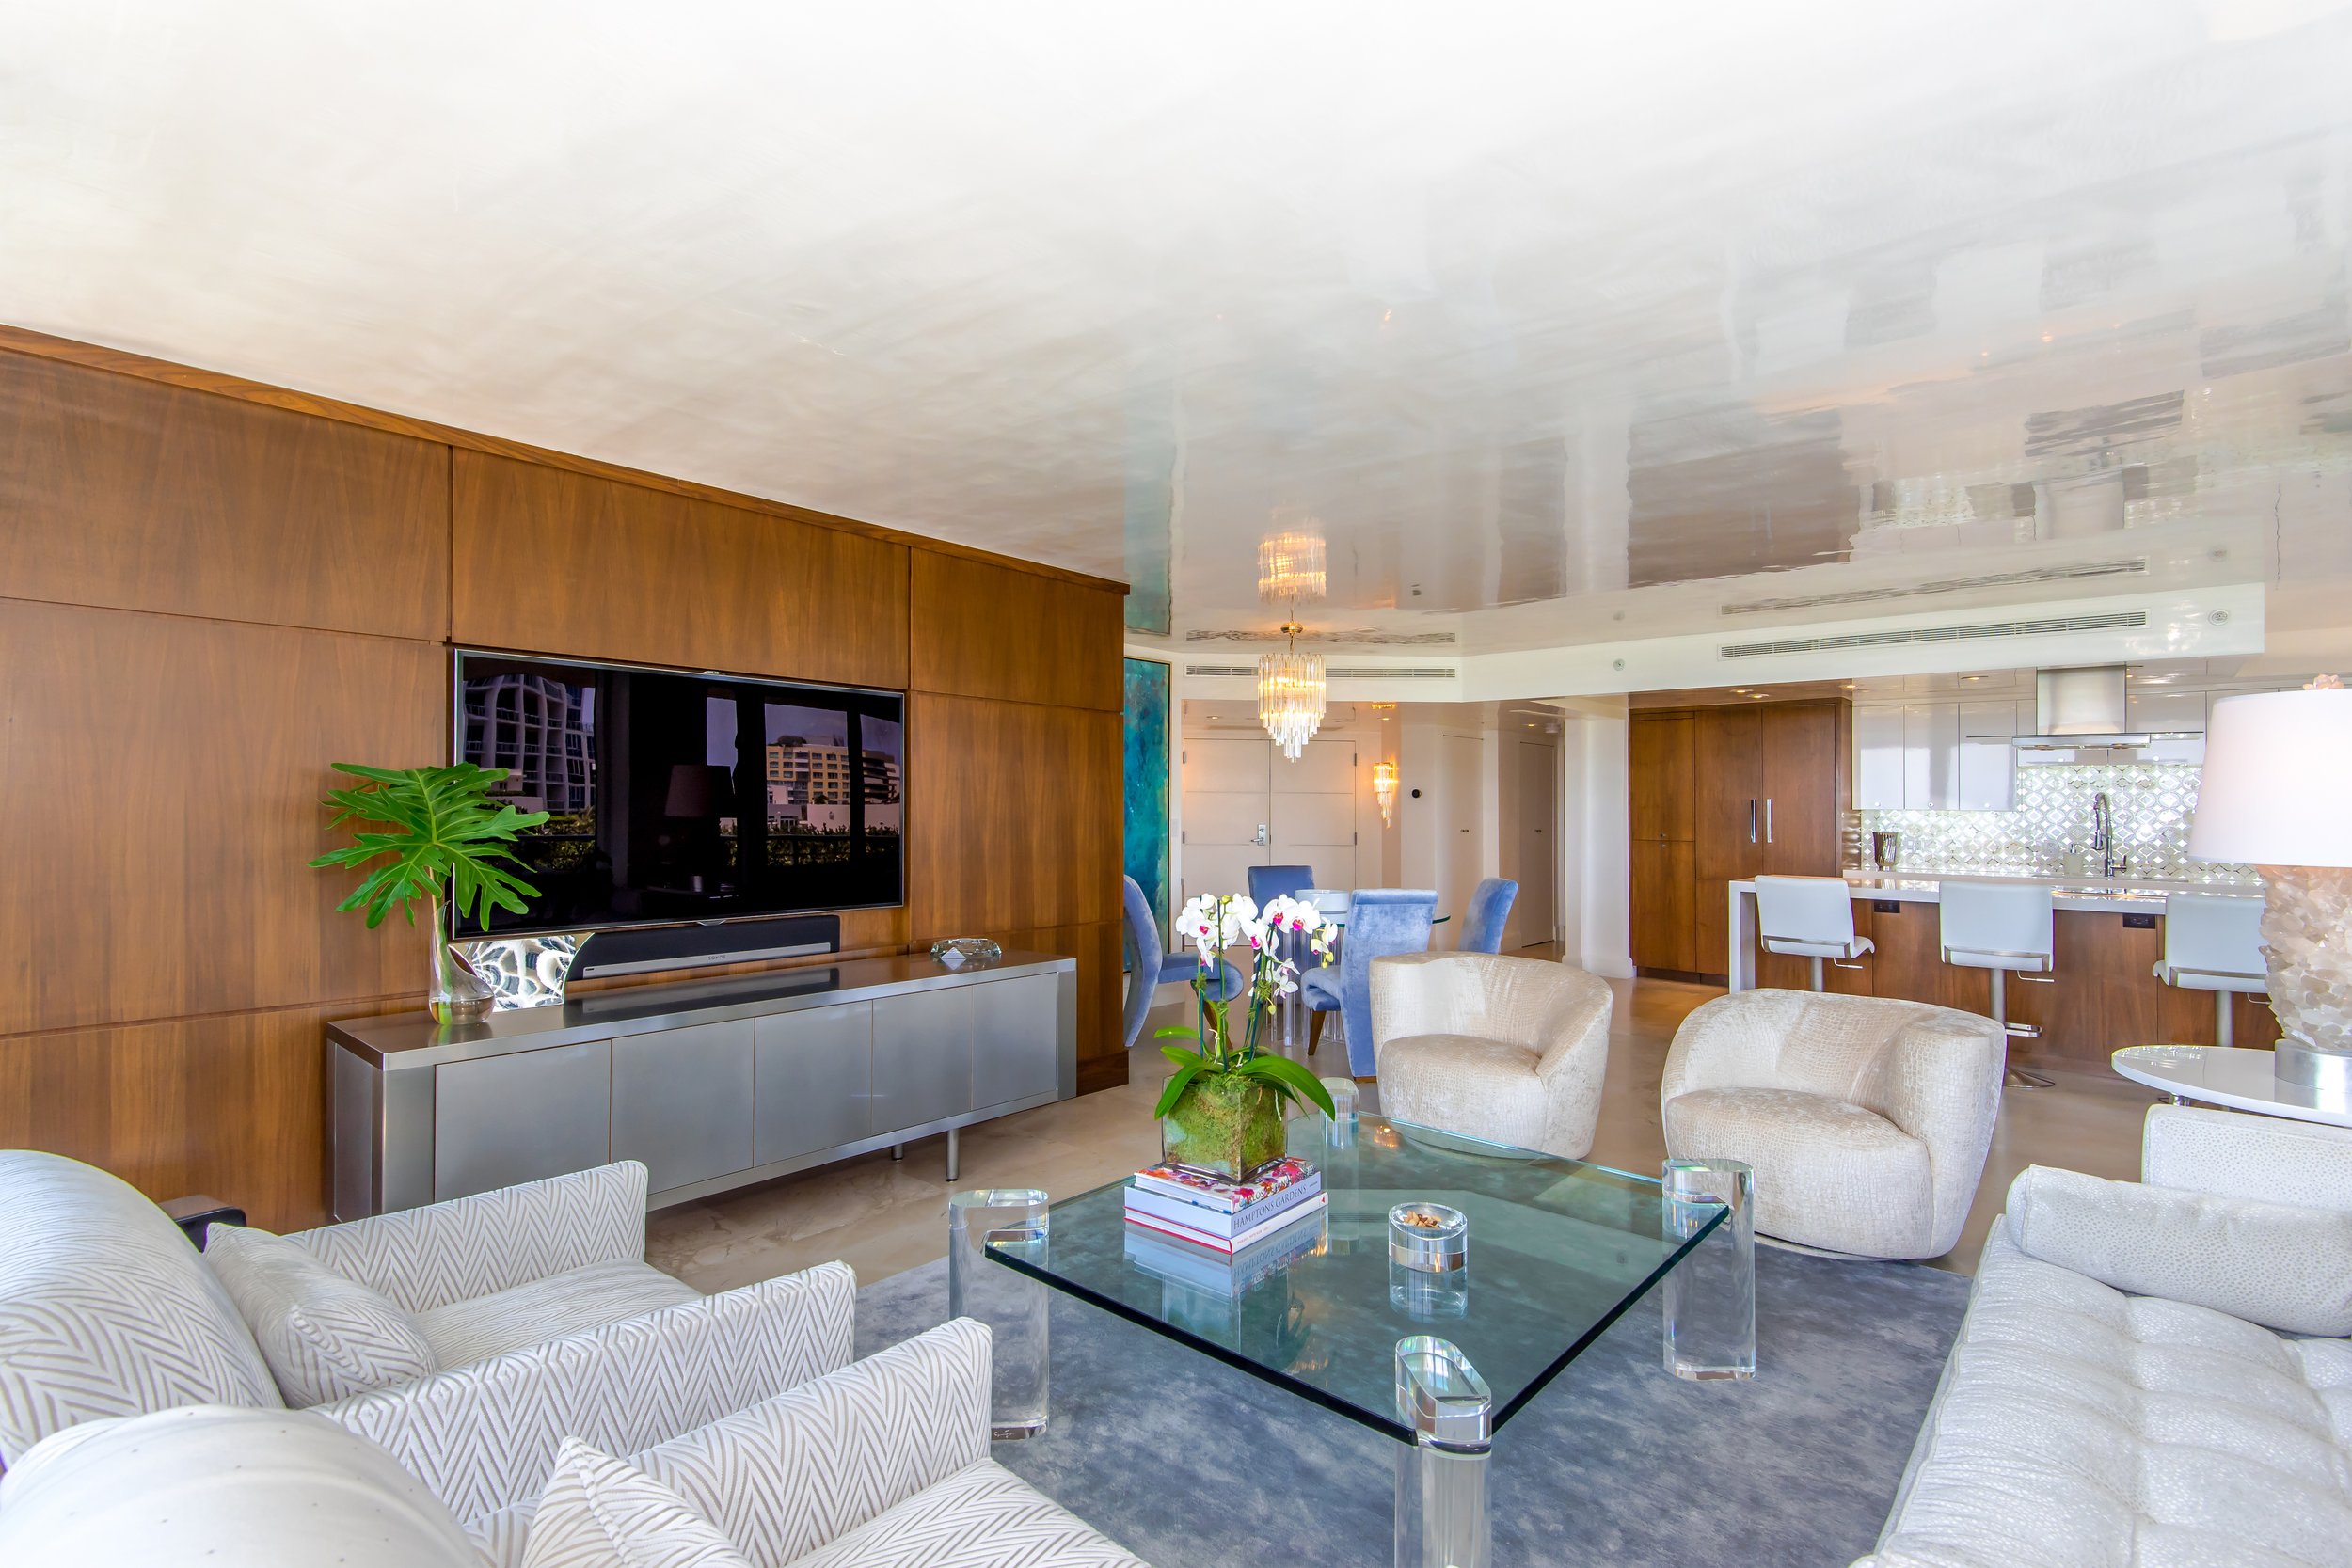 Master Brokers Forum Listing: Check Out This South Beach Corner Unit In South Pointe Tower Asking $2.75 Million 8.jpg